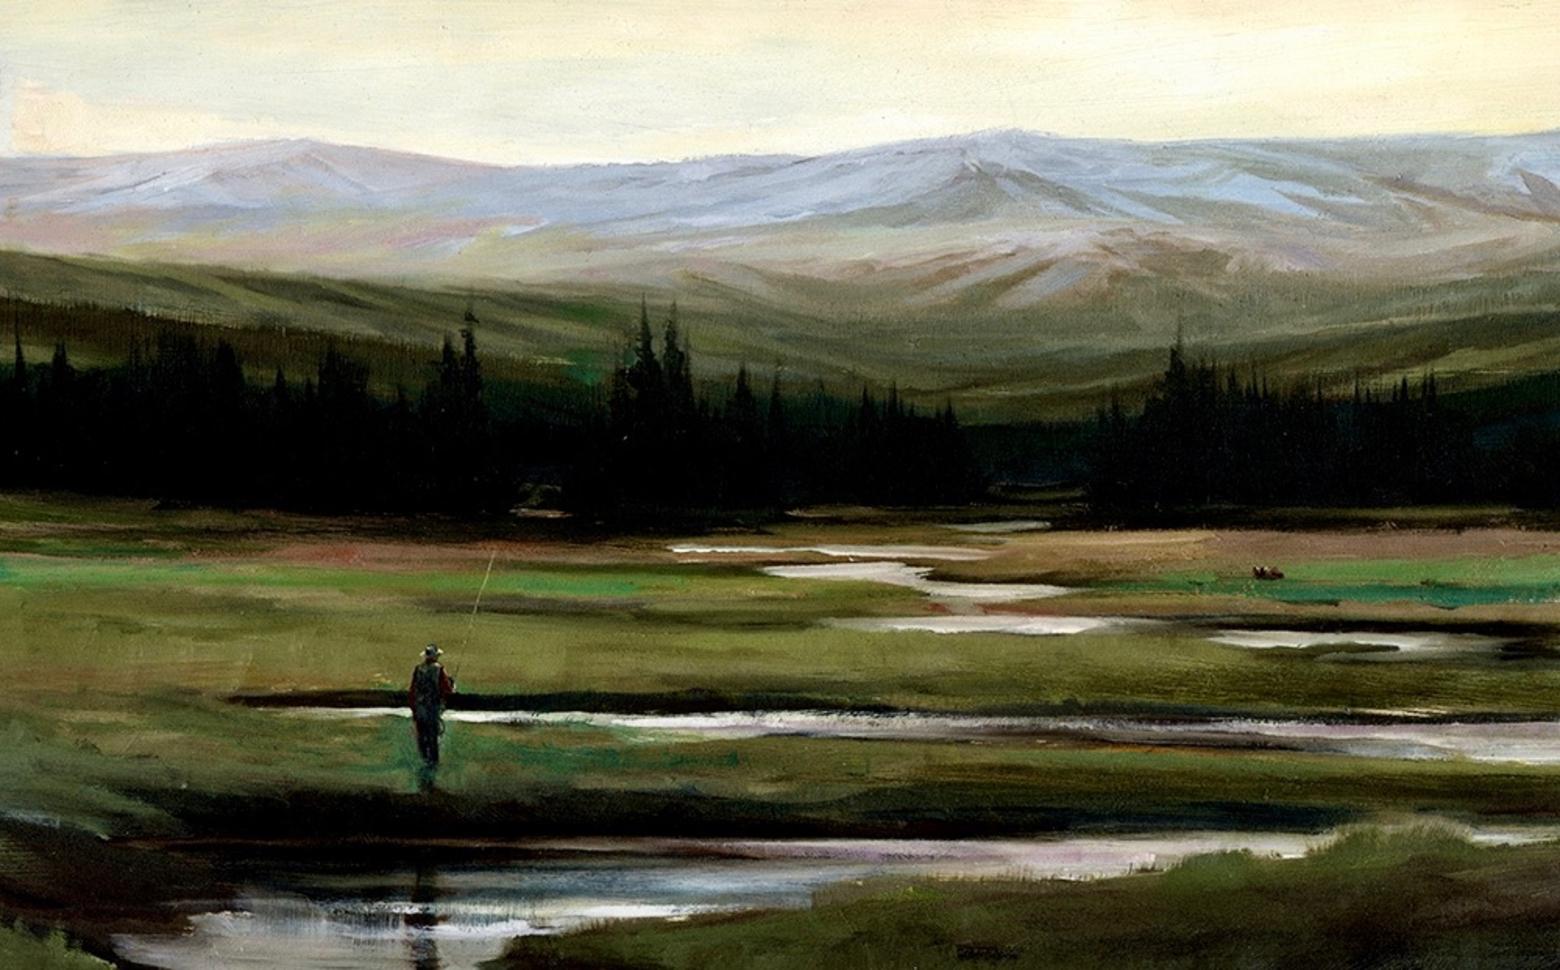 "Grizzly Fisherman," a painting by Rod Crossman. Suppose, for a moment, that the creek in this fictional scene was real yet little known. And suppose a travel/outdoor recreation writer wrote a story touting that it contained the best trout fishing in Greater Yellowstone and then circulated the story on social media. How long do you think the quality of the fishing, the peace of the place and the solace it provides for wildlife, like the grizzly in this scene, would last? Every year, promotion is happening with real places and seldom are the consequences considered. To see more of Crossman's amazing nature paintings go to rodcrossman.com